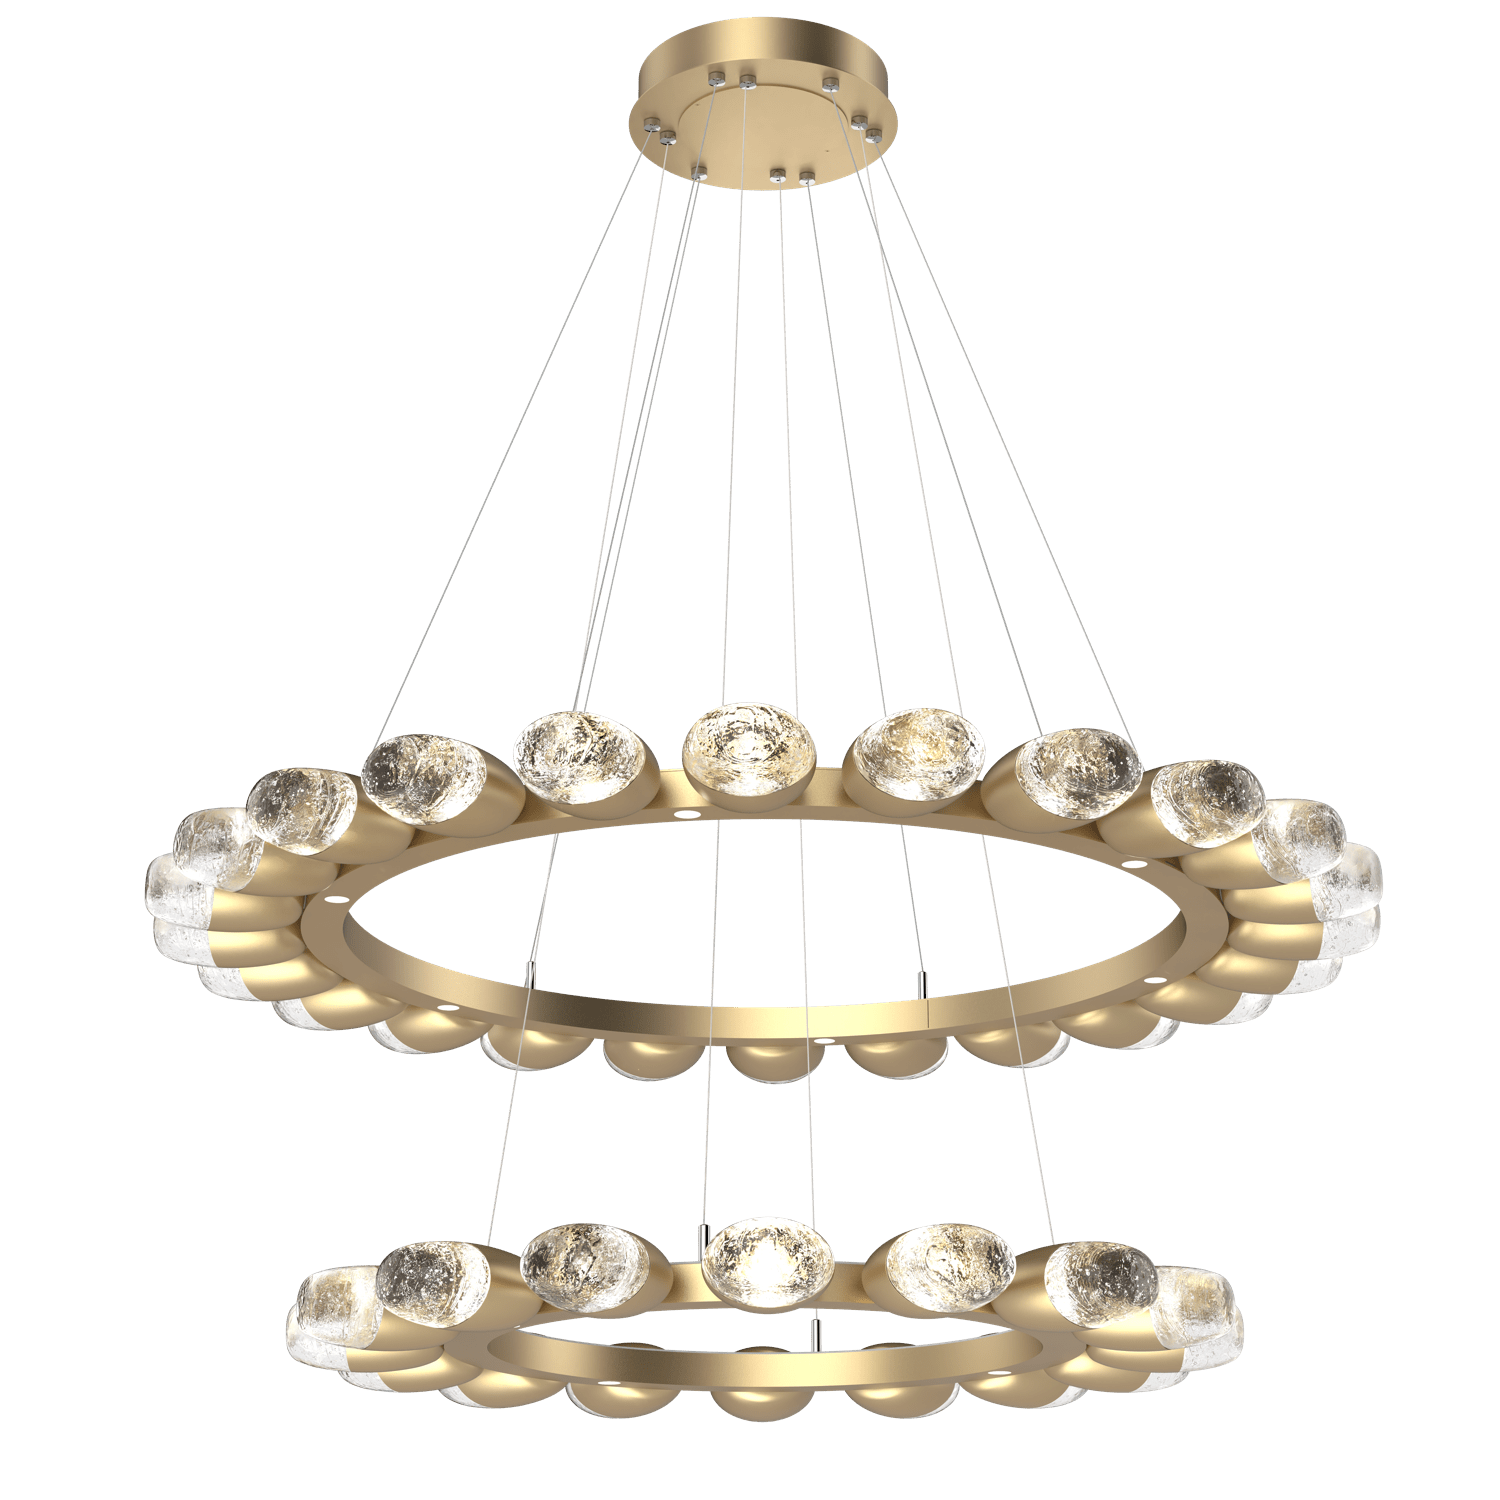 CHB0079-2T-GB-Hammerton-Studio-Pebble-48-inch-two-tier-radial-ring-chandelier-with-gilded-brass-finish-and-clear-cast-glass-shades-and-LED-lamping